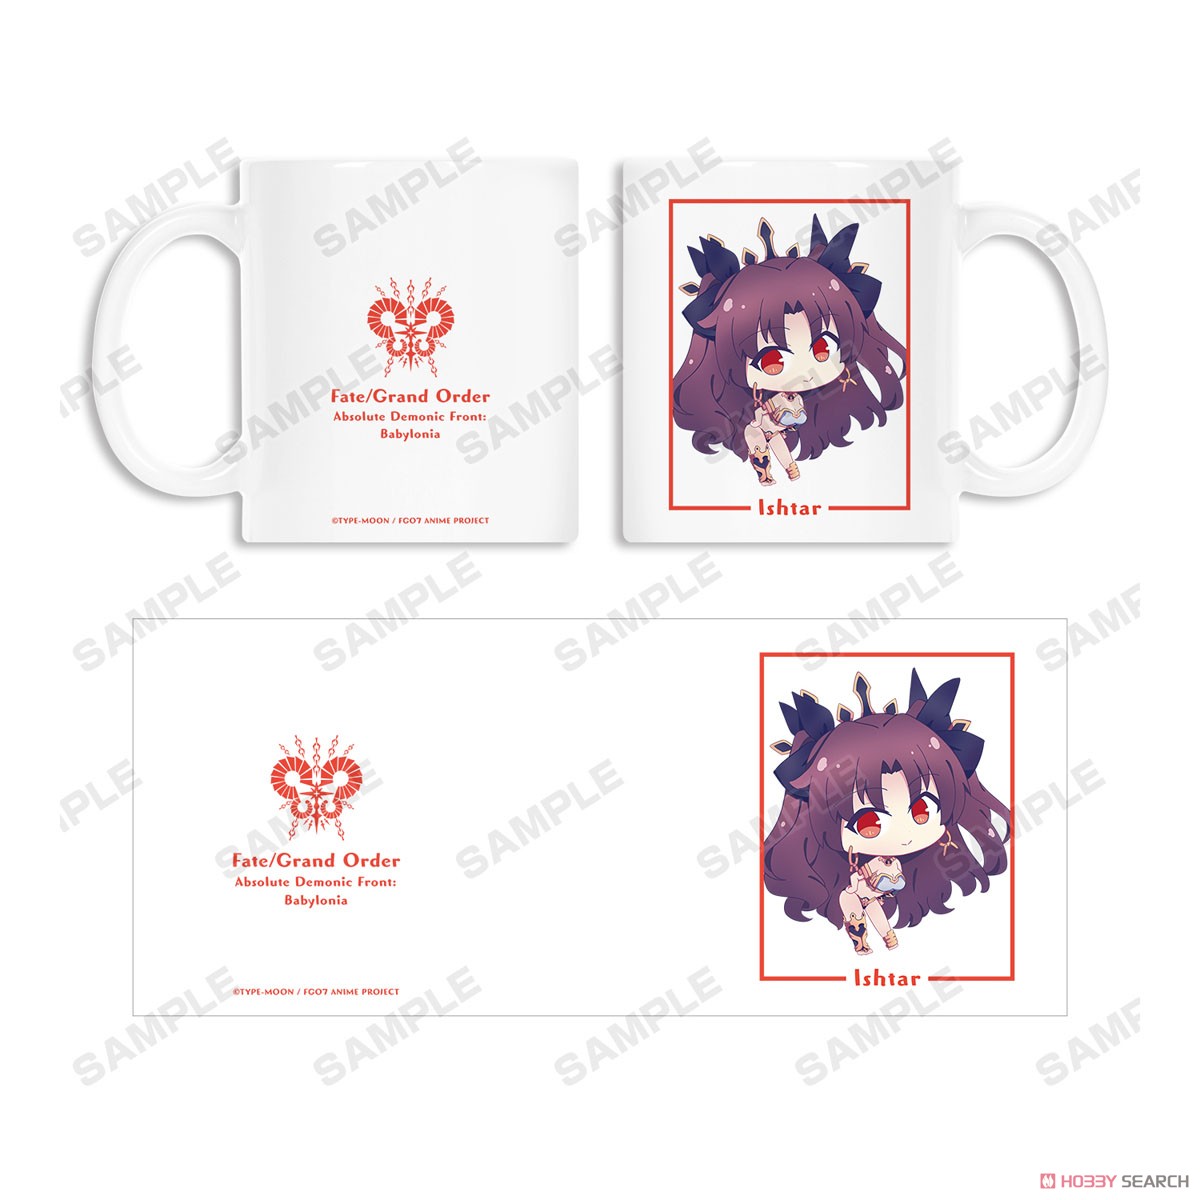 Fate/Grand Order - Absolute Demon Battlefront: Babylonia Ishtar Chibi Chara Mug Cup (Anime Toy) Item picture3